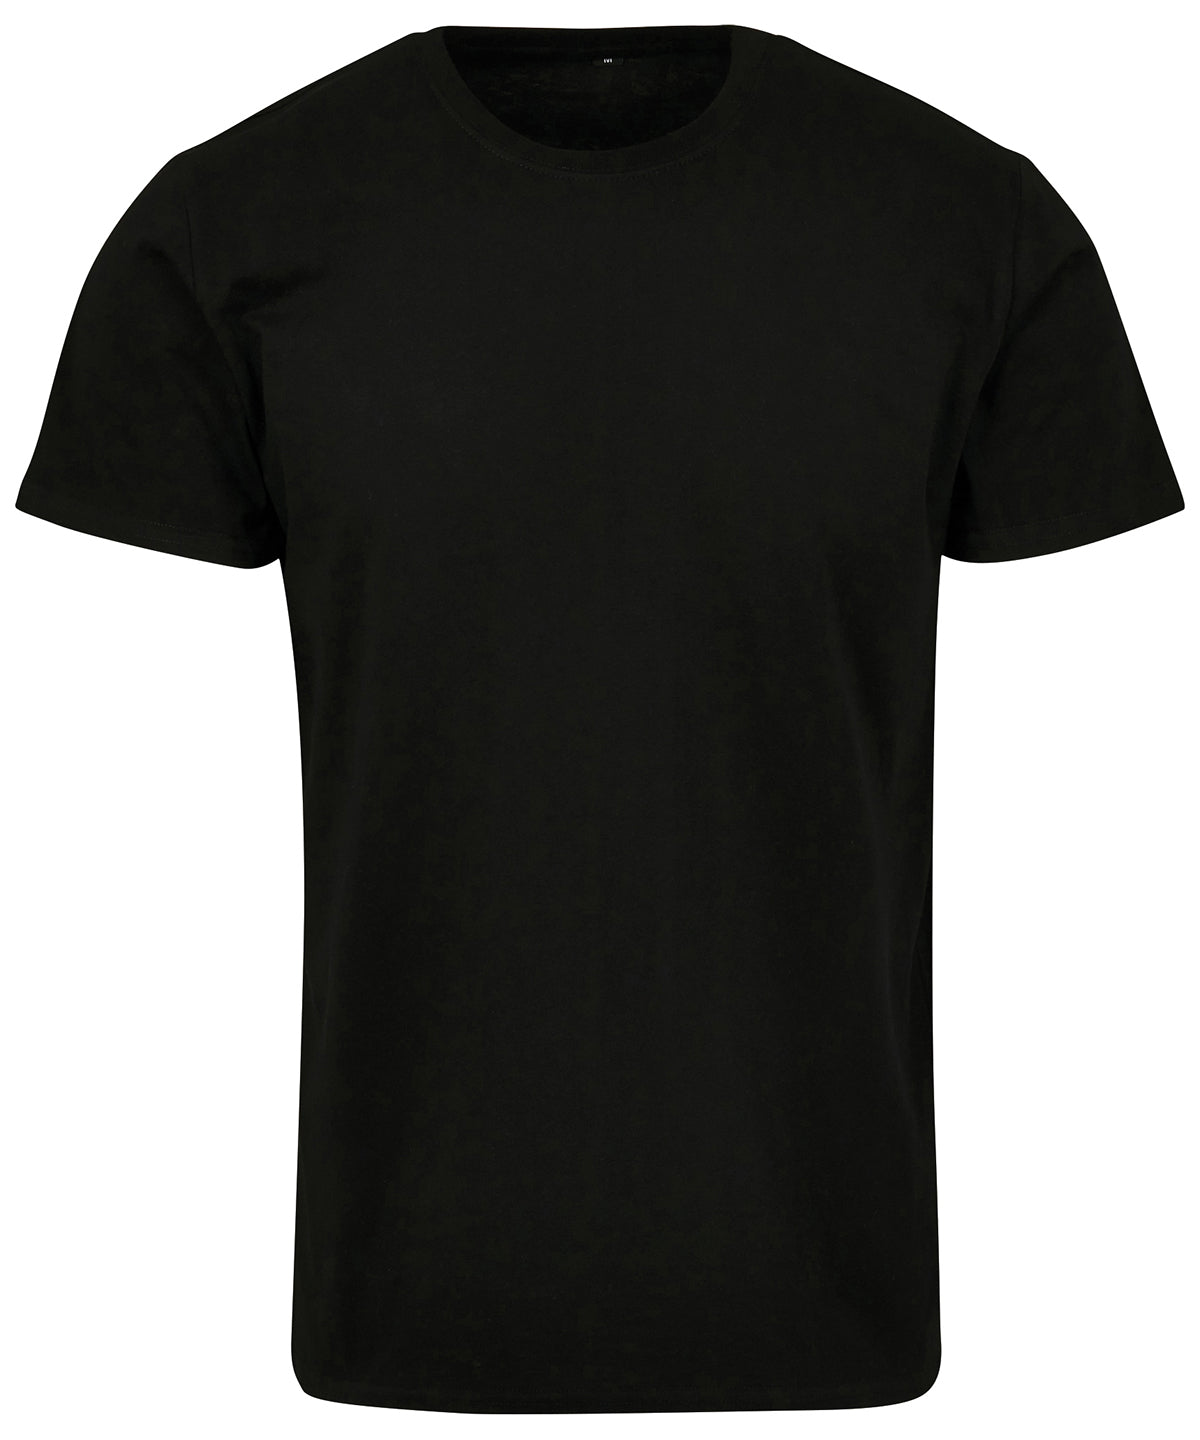 Personalised T-Shirts - Black Build Your Brand Basic t-shirt